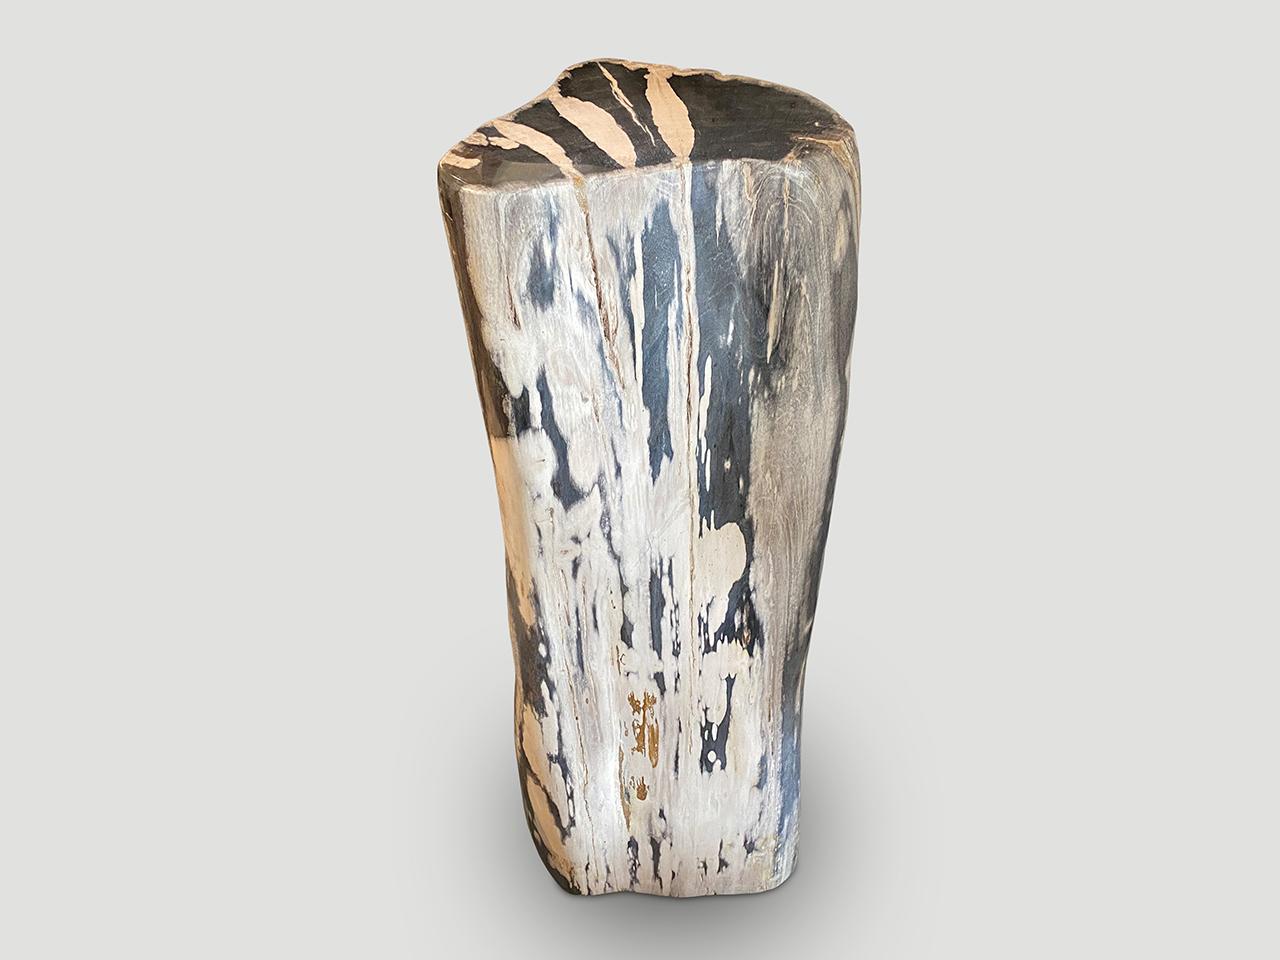 Striking contrasting tones on the beautiful high quality petrified wood rare pedestal.  It’s fascinating how Mother Nature produces these stunning 40 million year old petrified teak logs with such contrasting colors and natural patterns throughout.